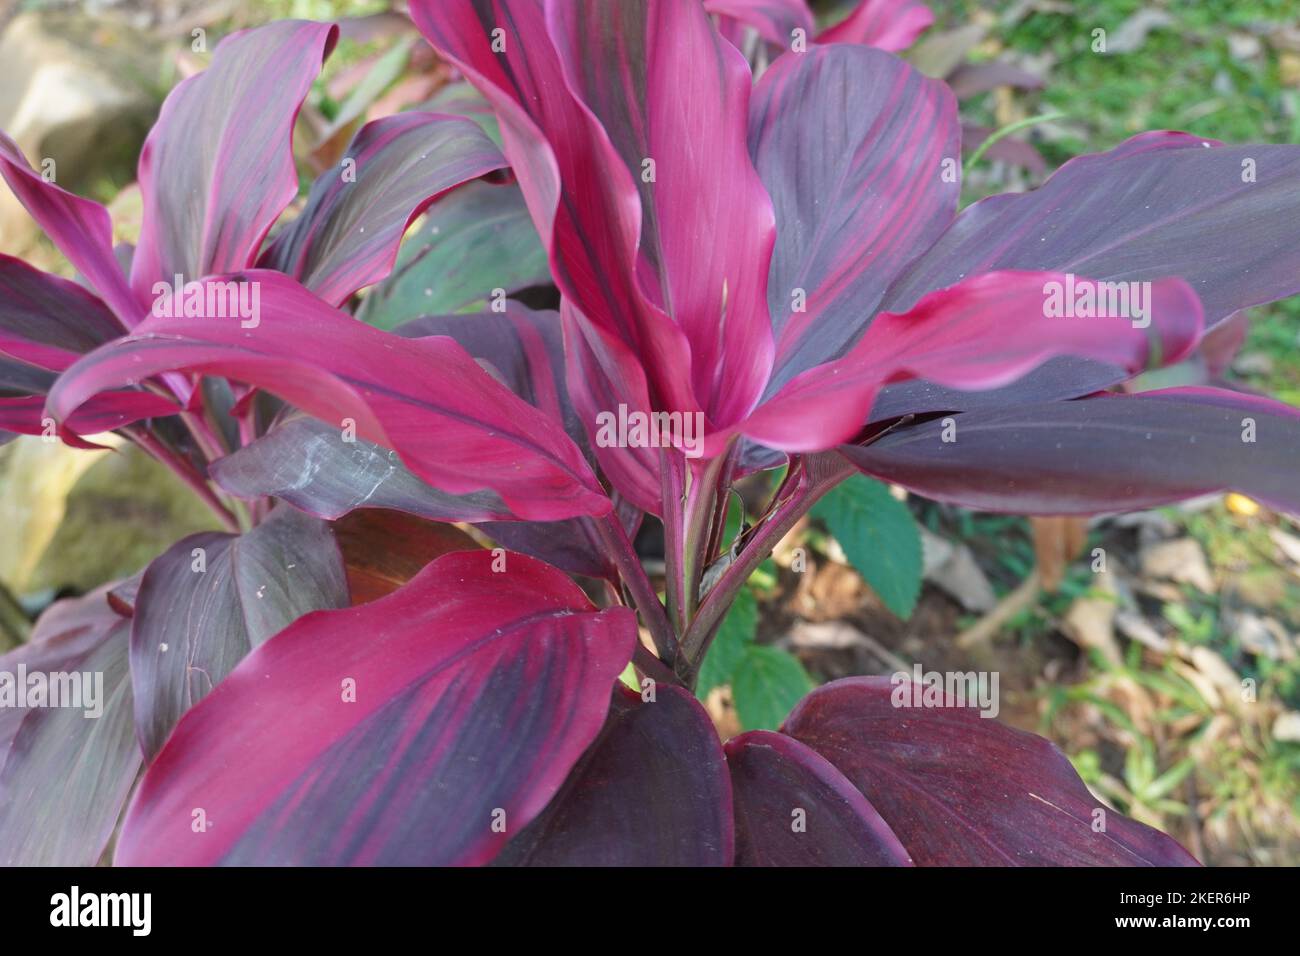 Close up red Cordyline flower at the park Stock Photo